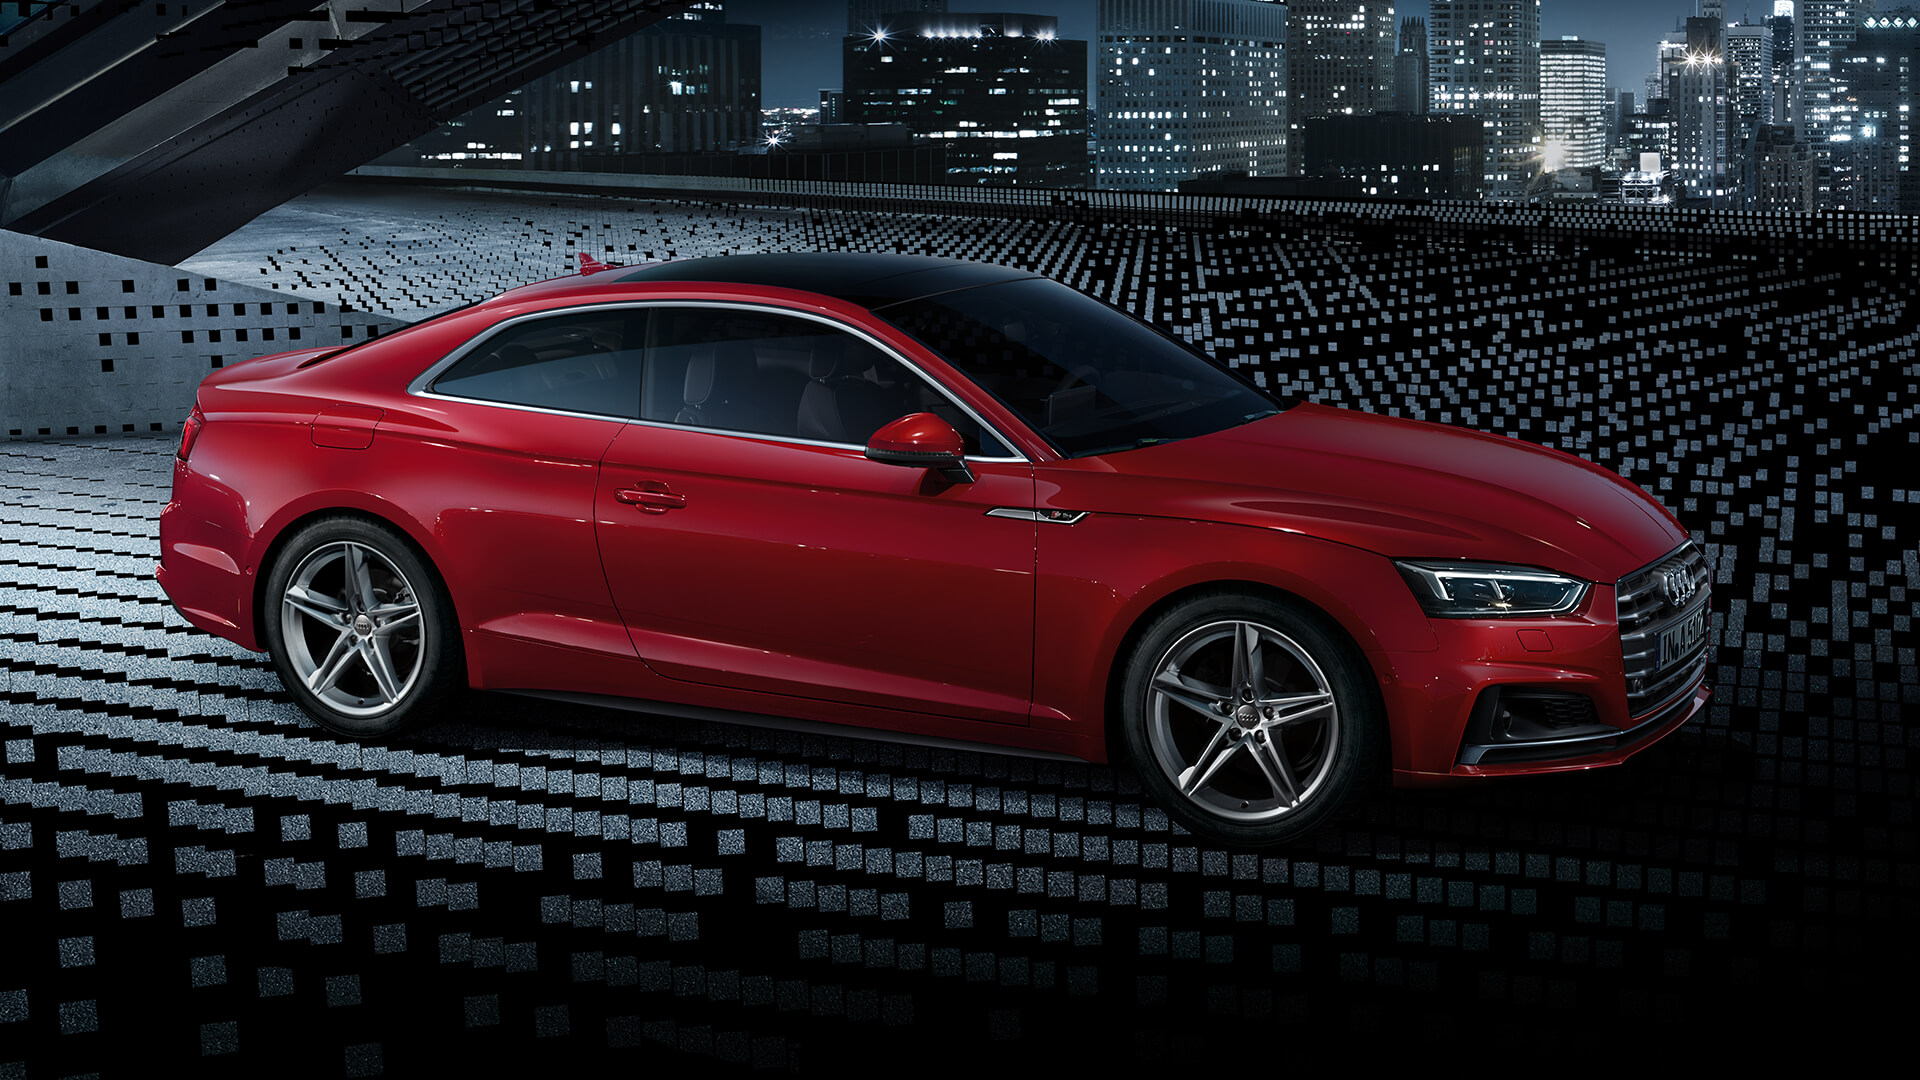 Audi A5 Backgrounds On Wallpapers Vista - Red Dark Audi A5 - HD Wallpaper 